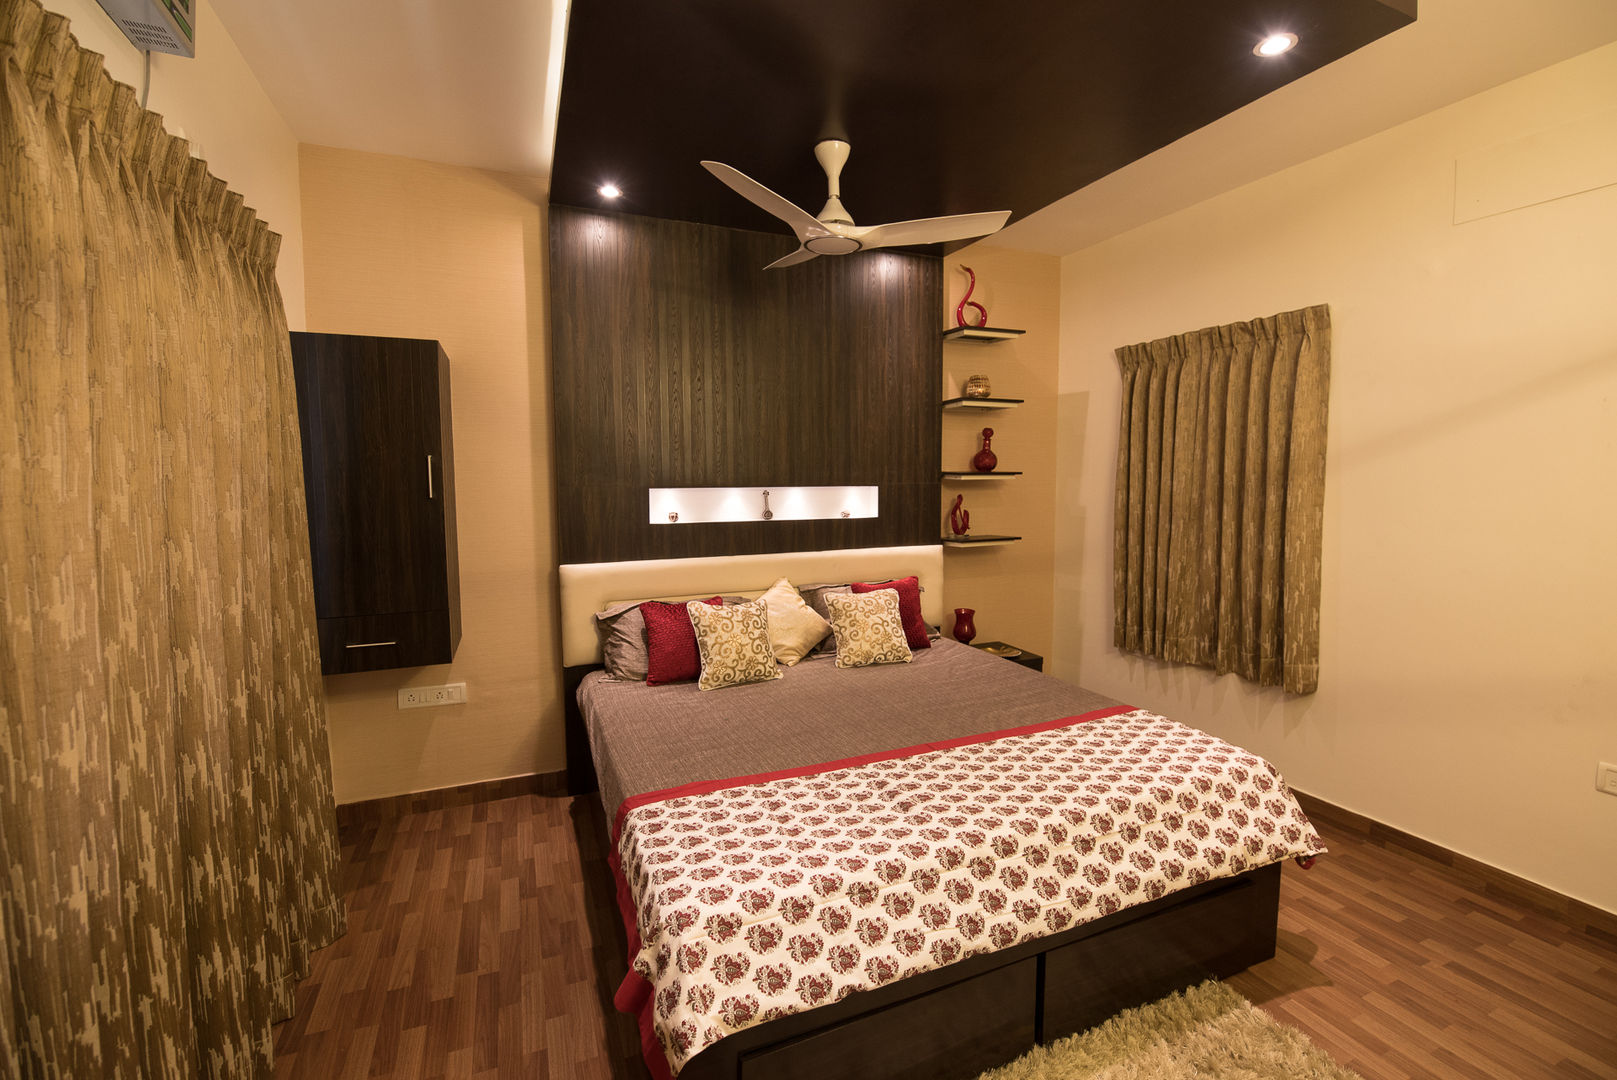 Premium 3 BHK Interiors for a Doctor's residence at Chennai, Aikaa Designs Aikaa Designs Chambre moderne